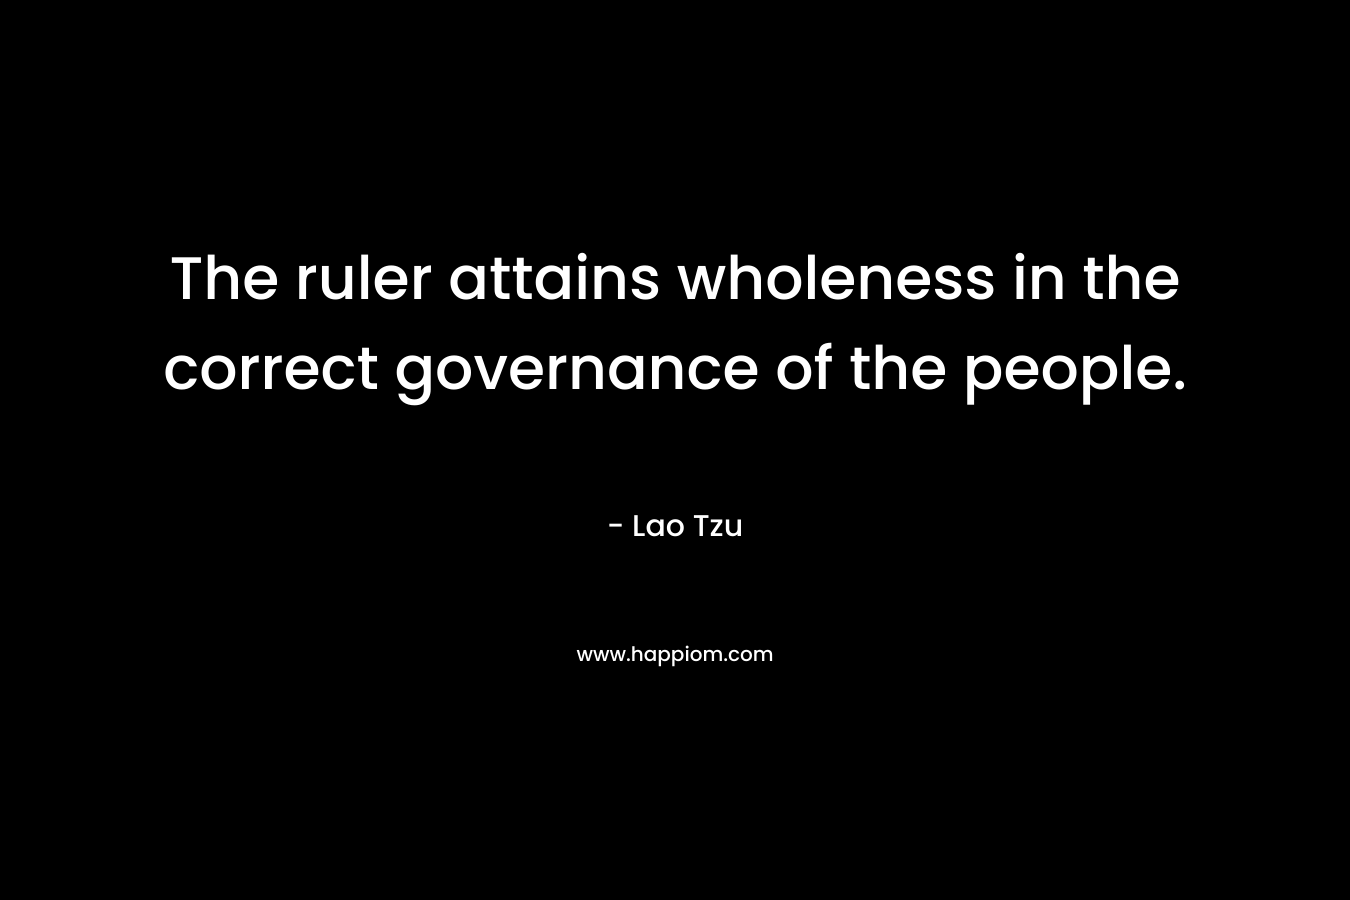 The ruler attains wholeness in the correct governance of the people. – Lao Tzu